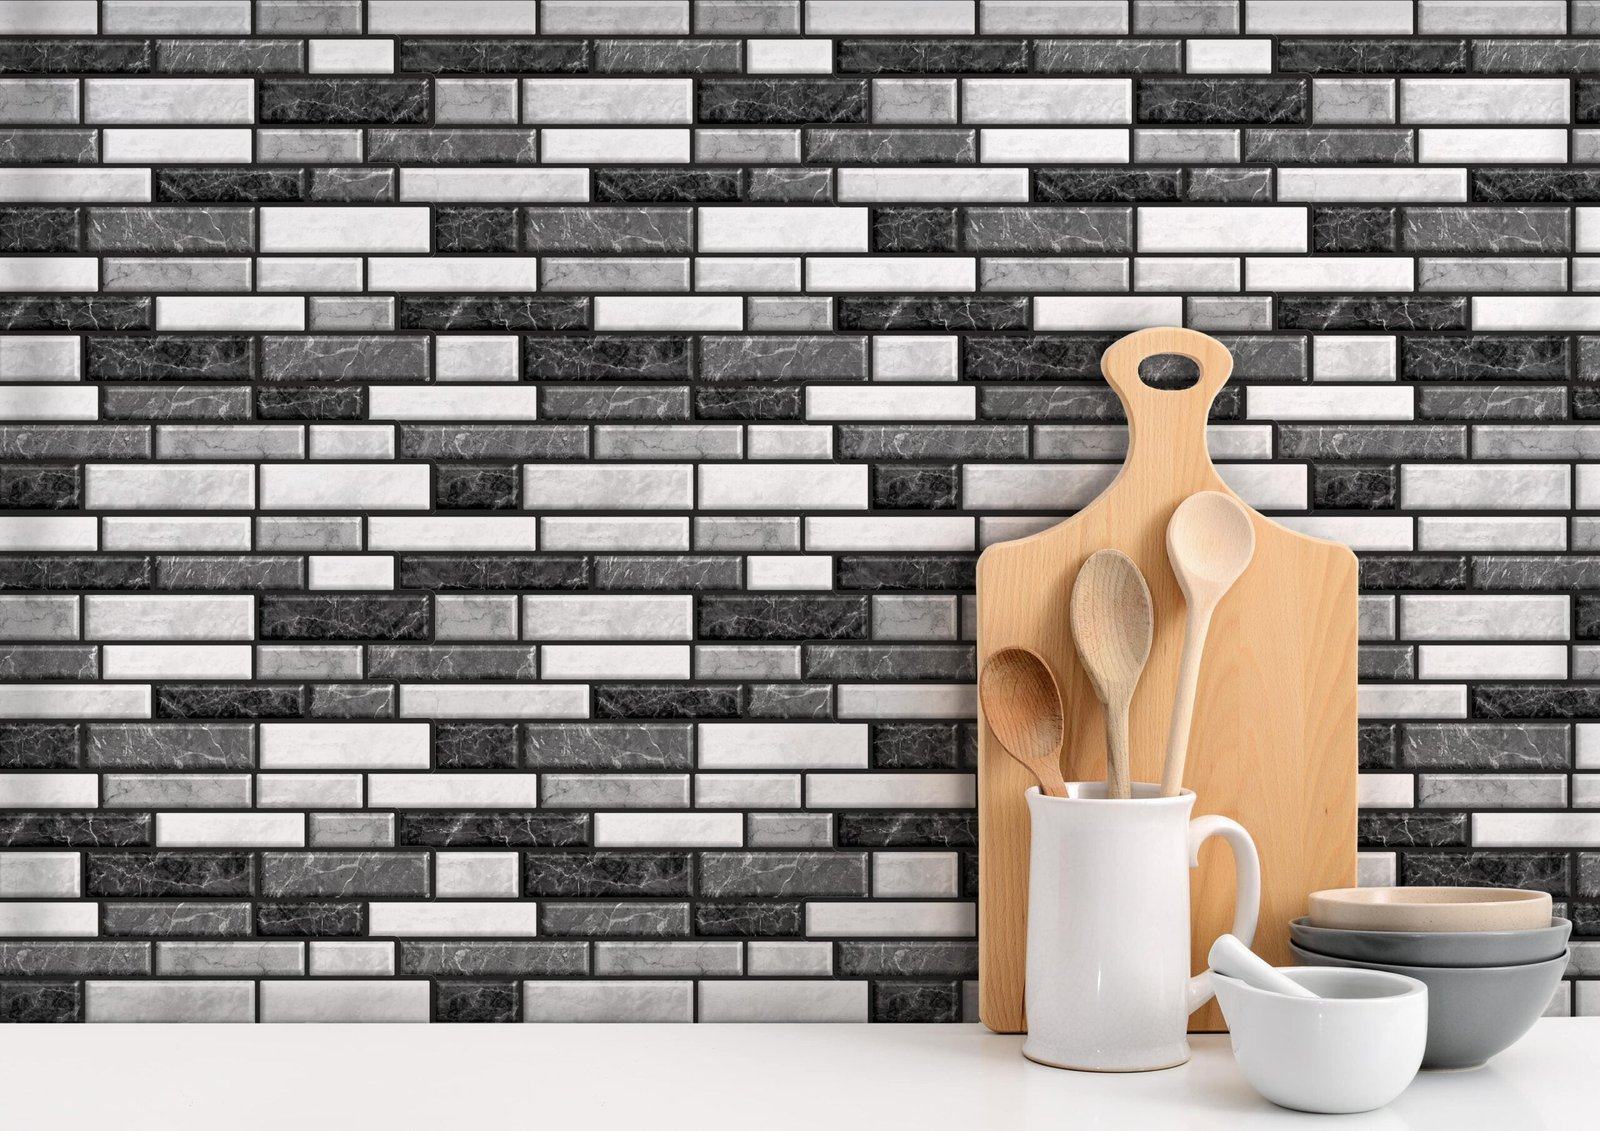 Peel and Stick 3D Tiles Marble Long Stripes Peel and Stick Tiles - Mosaicowall Mosaicowall Marble Long Stripes Peel and Stick Tiles